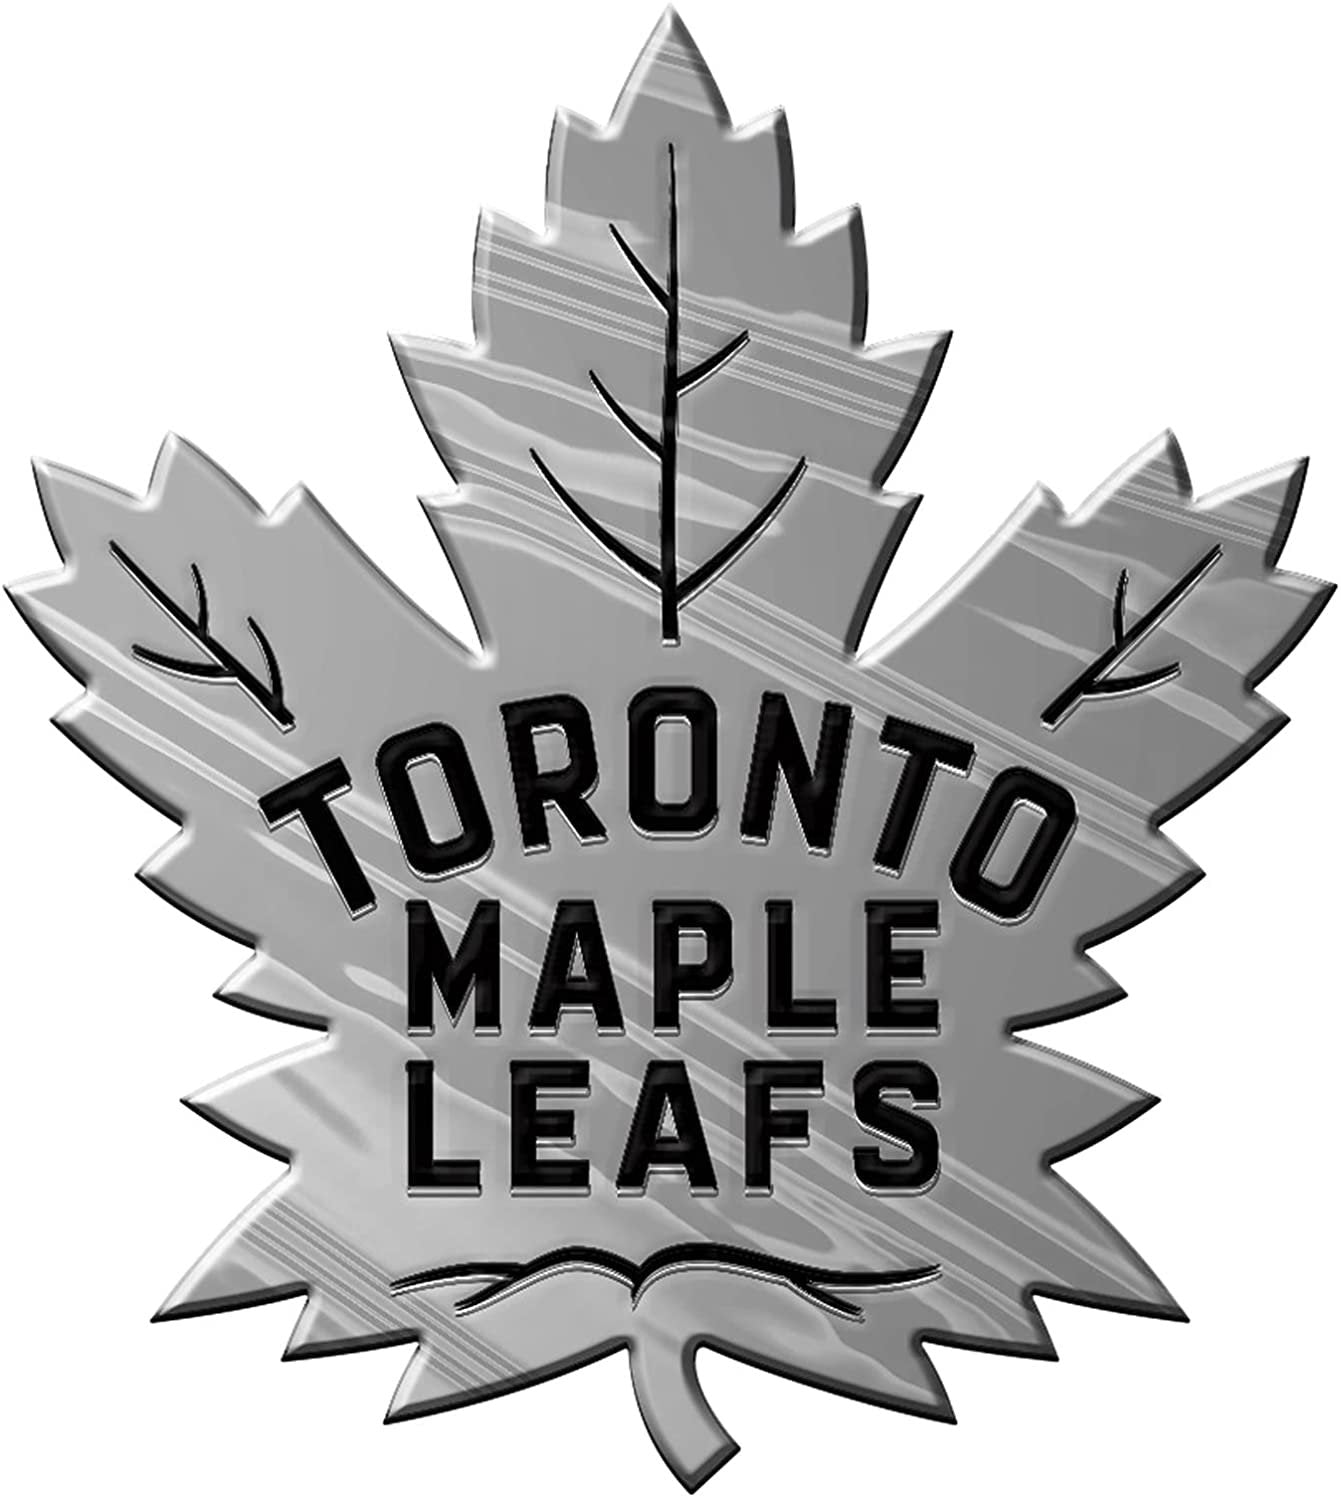 Toronto Maple Leafs Auto Emblem, Plastic Molded, Silver Chrome Color, Raised 3D Effect, Adhesive Backing